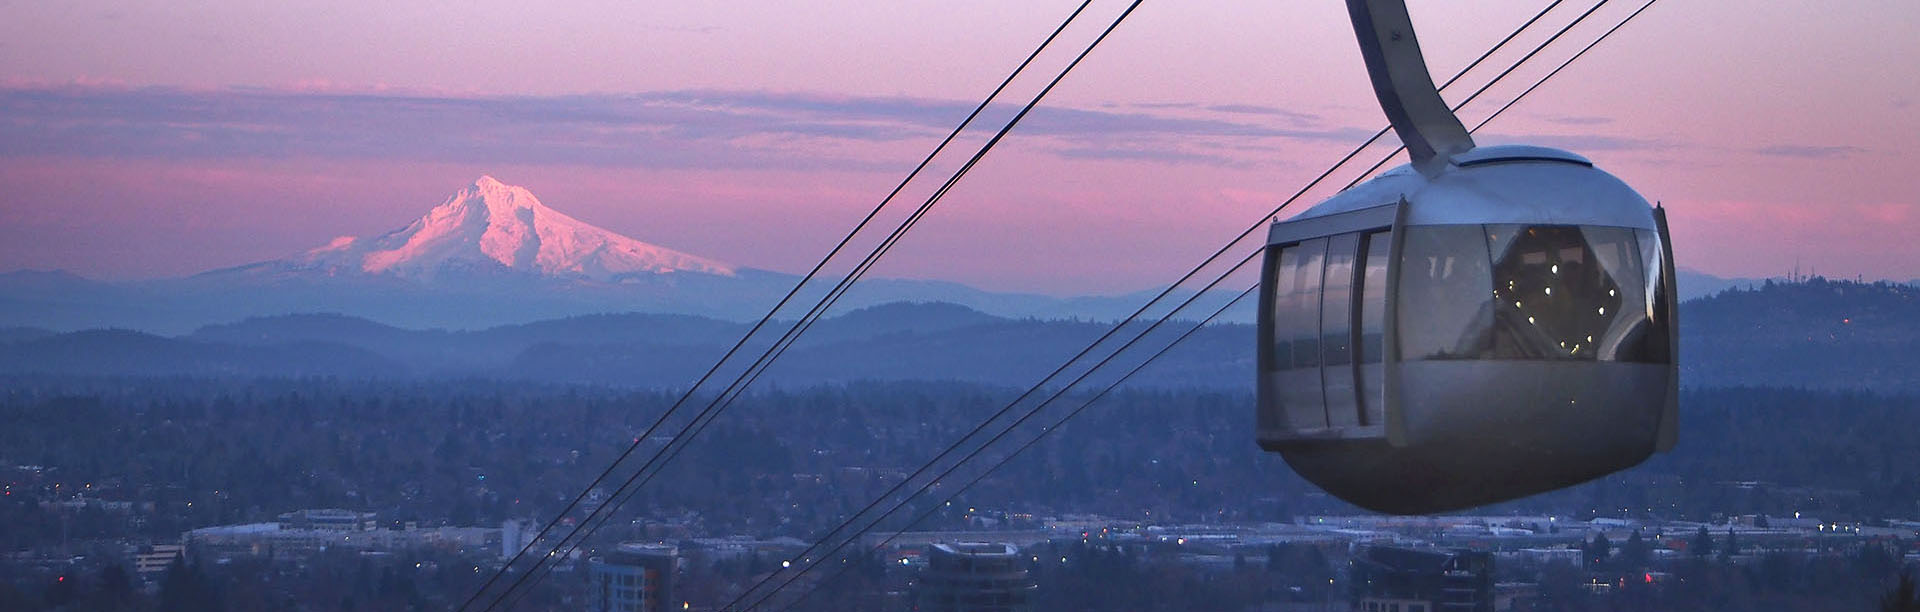 The Tram and Mount Hood at sunset